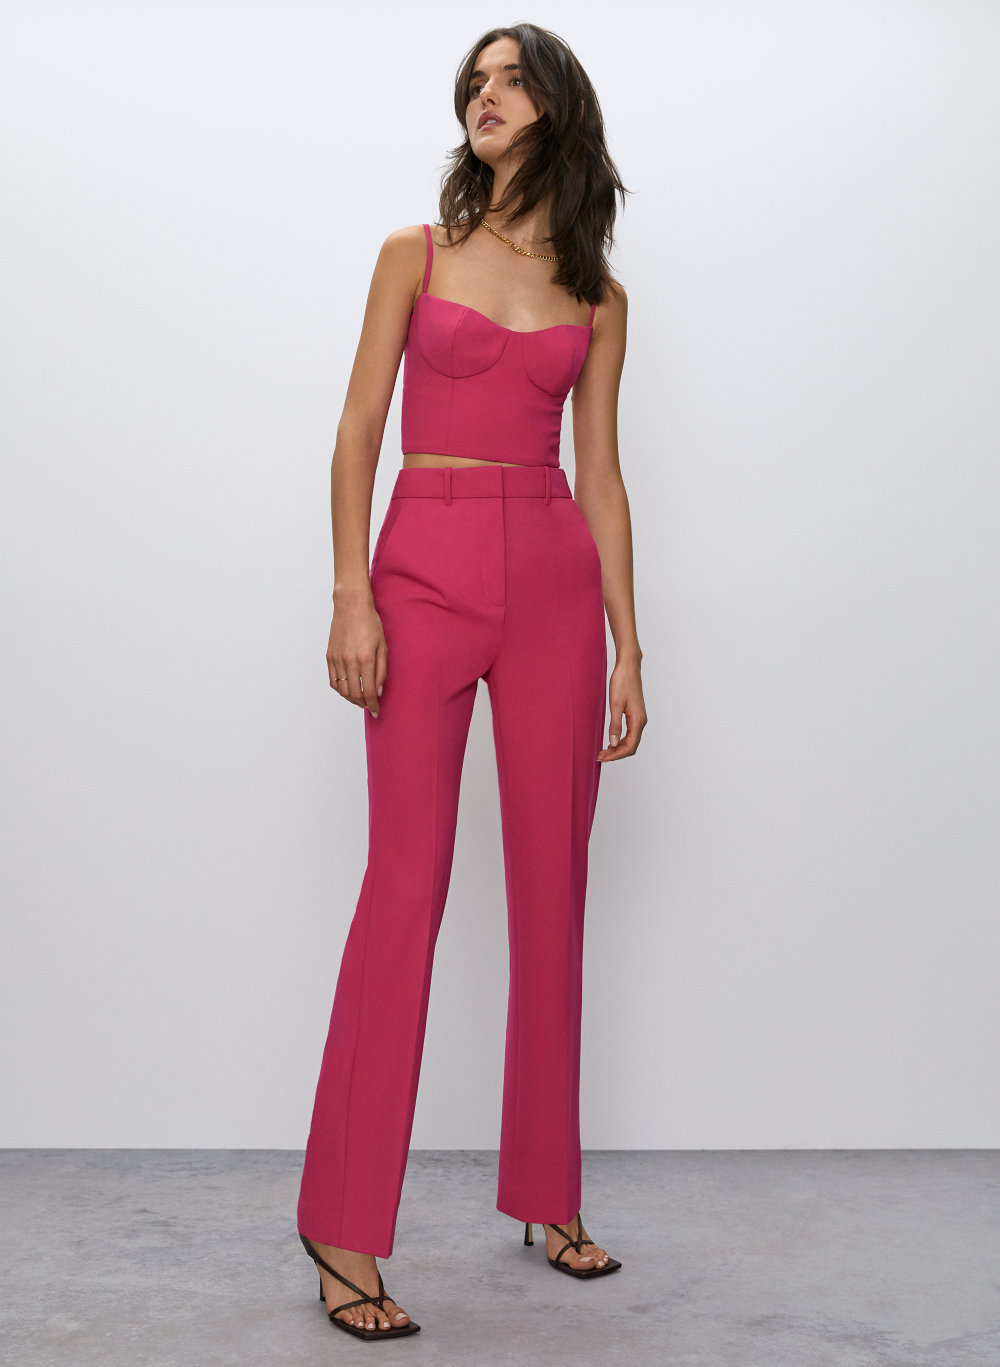 This in black, or navy blue | Editorial fashion, Fashion, Pants